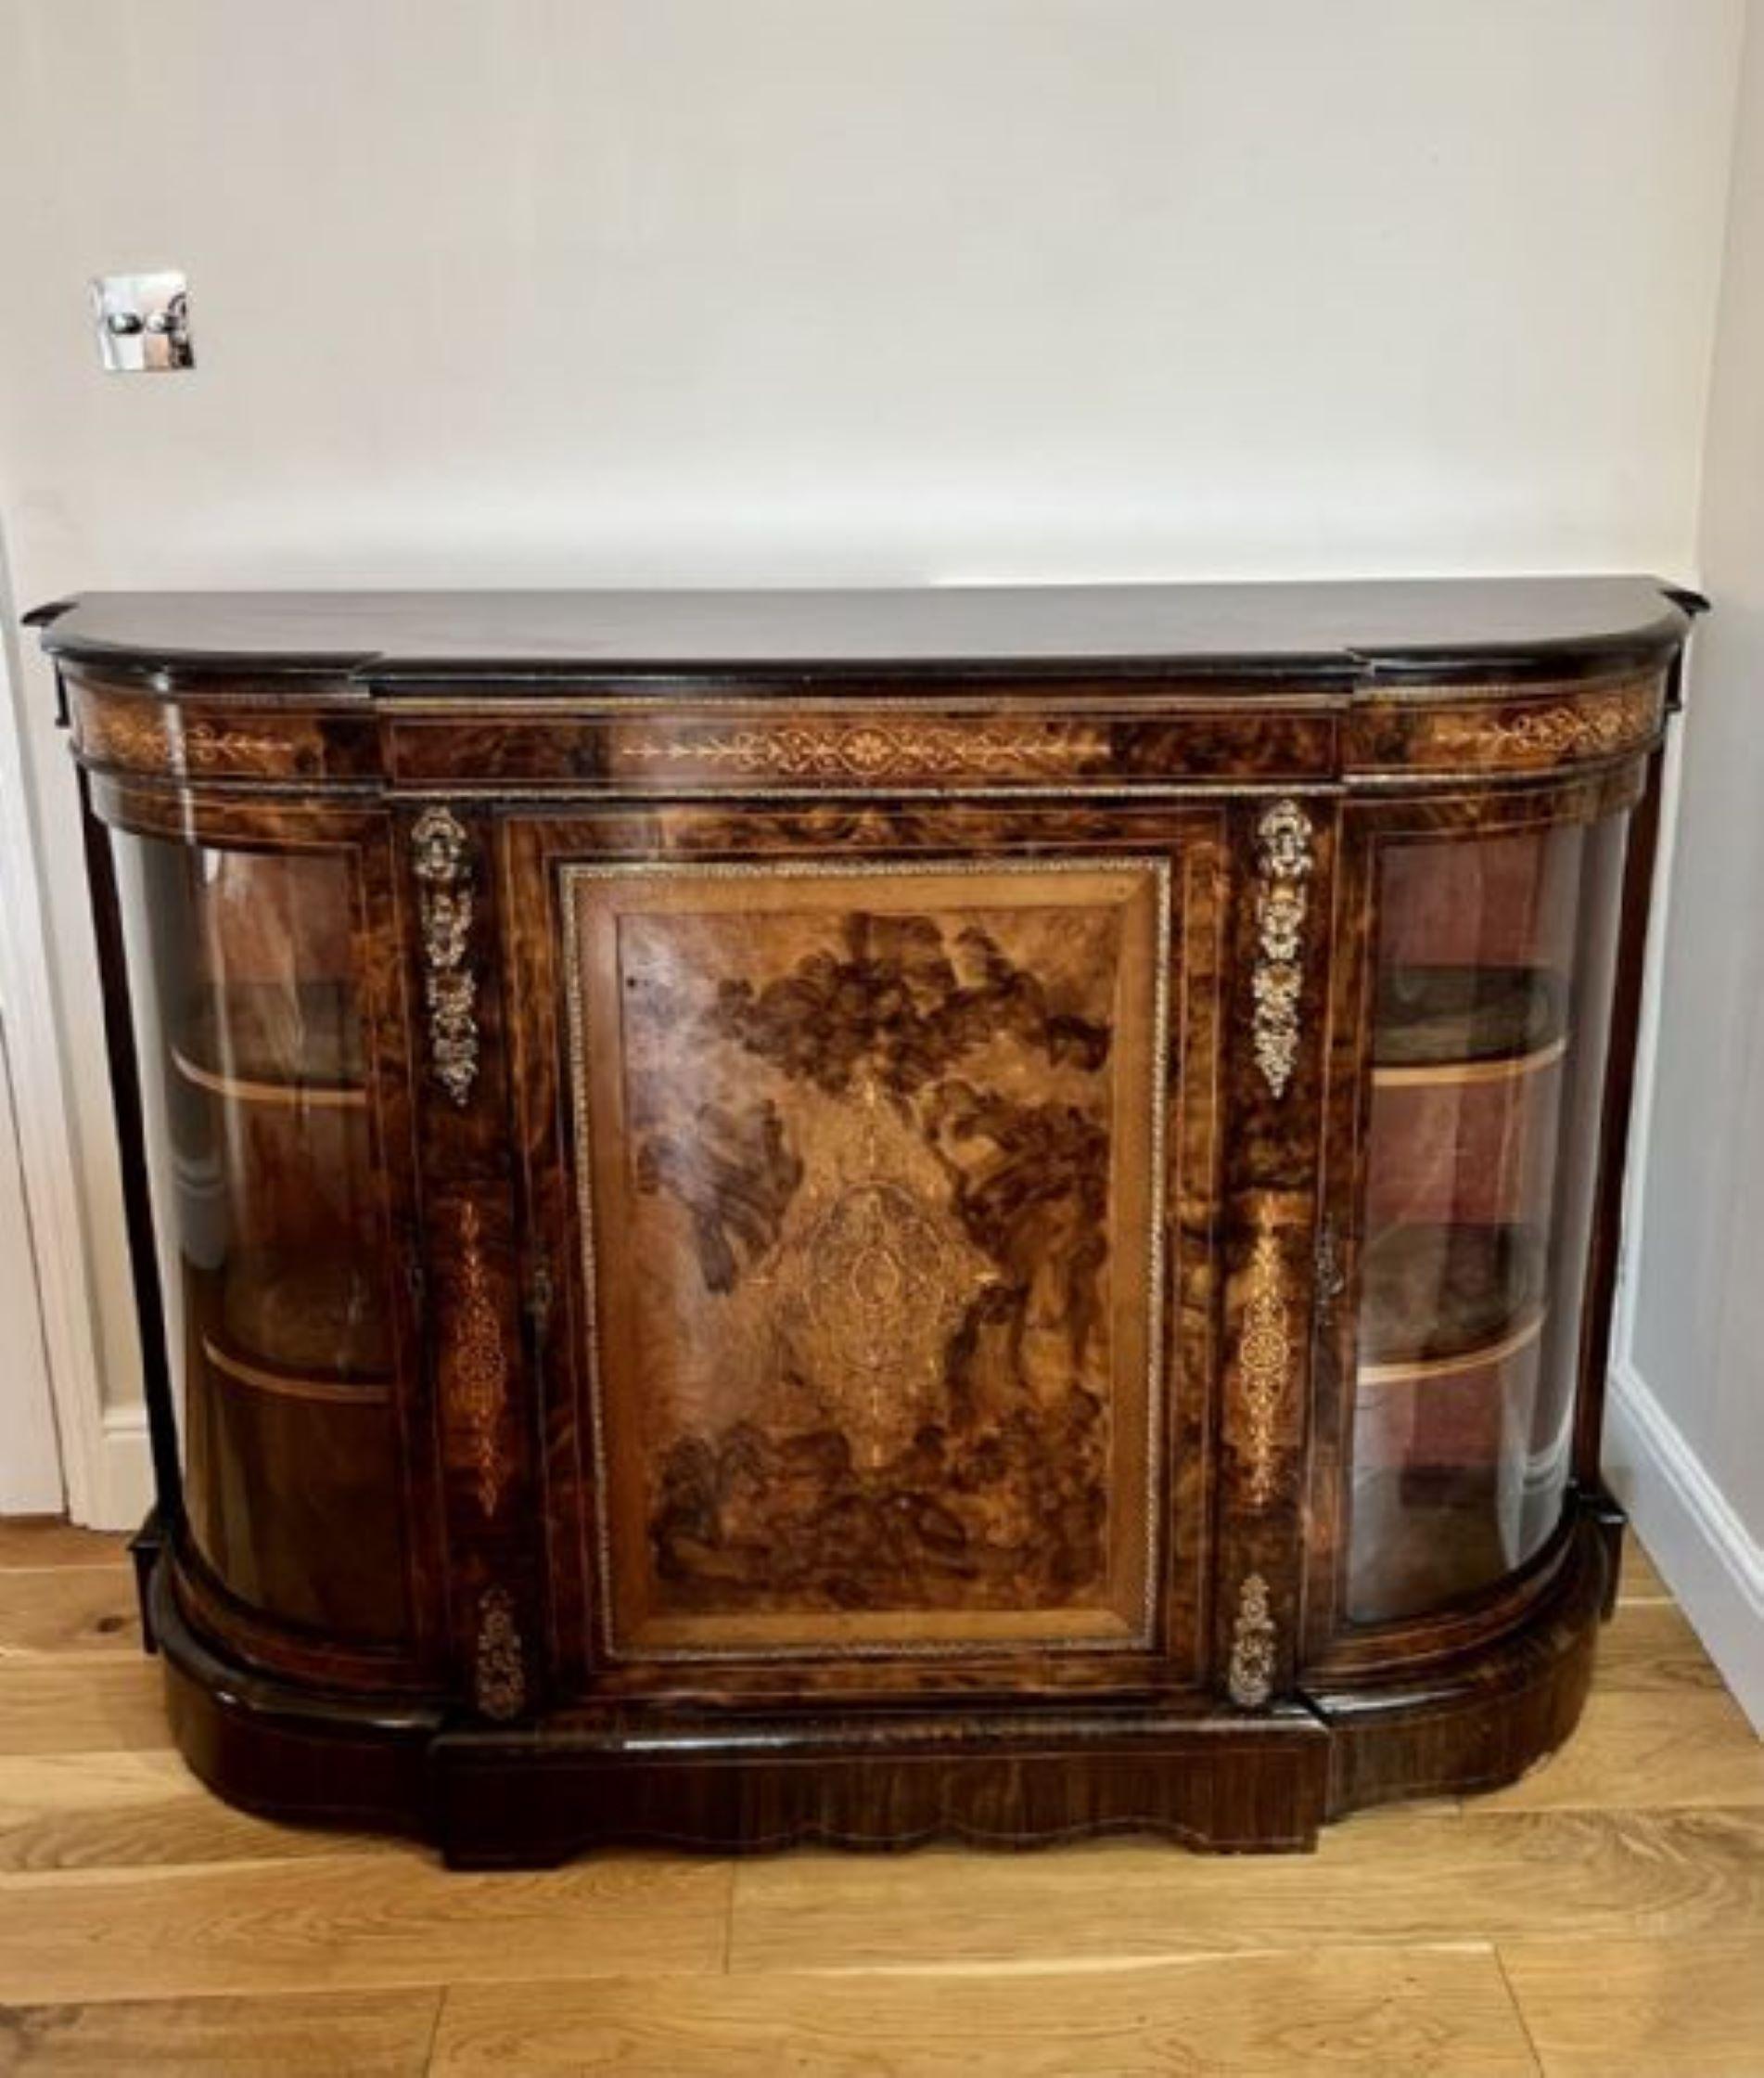 Superb quality antique Victorian burr walnut inlaid credenza having a quality burr walnut shaped top with an ebonies moulded edge above a shaped burr walnut inlaid frieze, single burr walnut inlaid door to the centre with ormolu mounts opening to